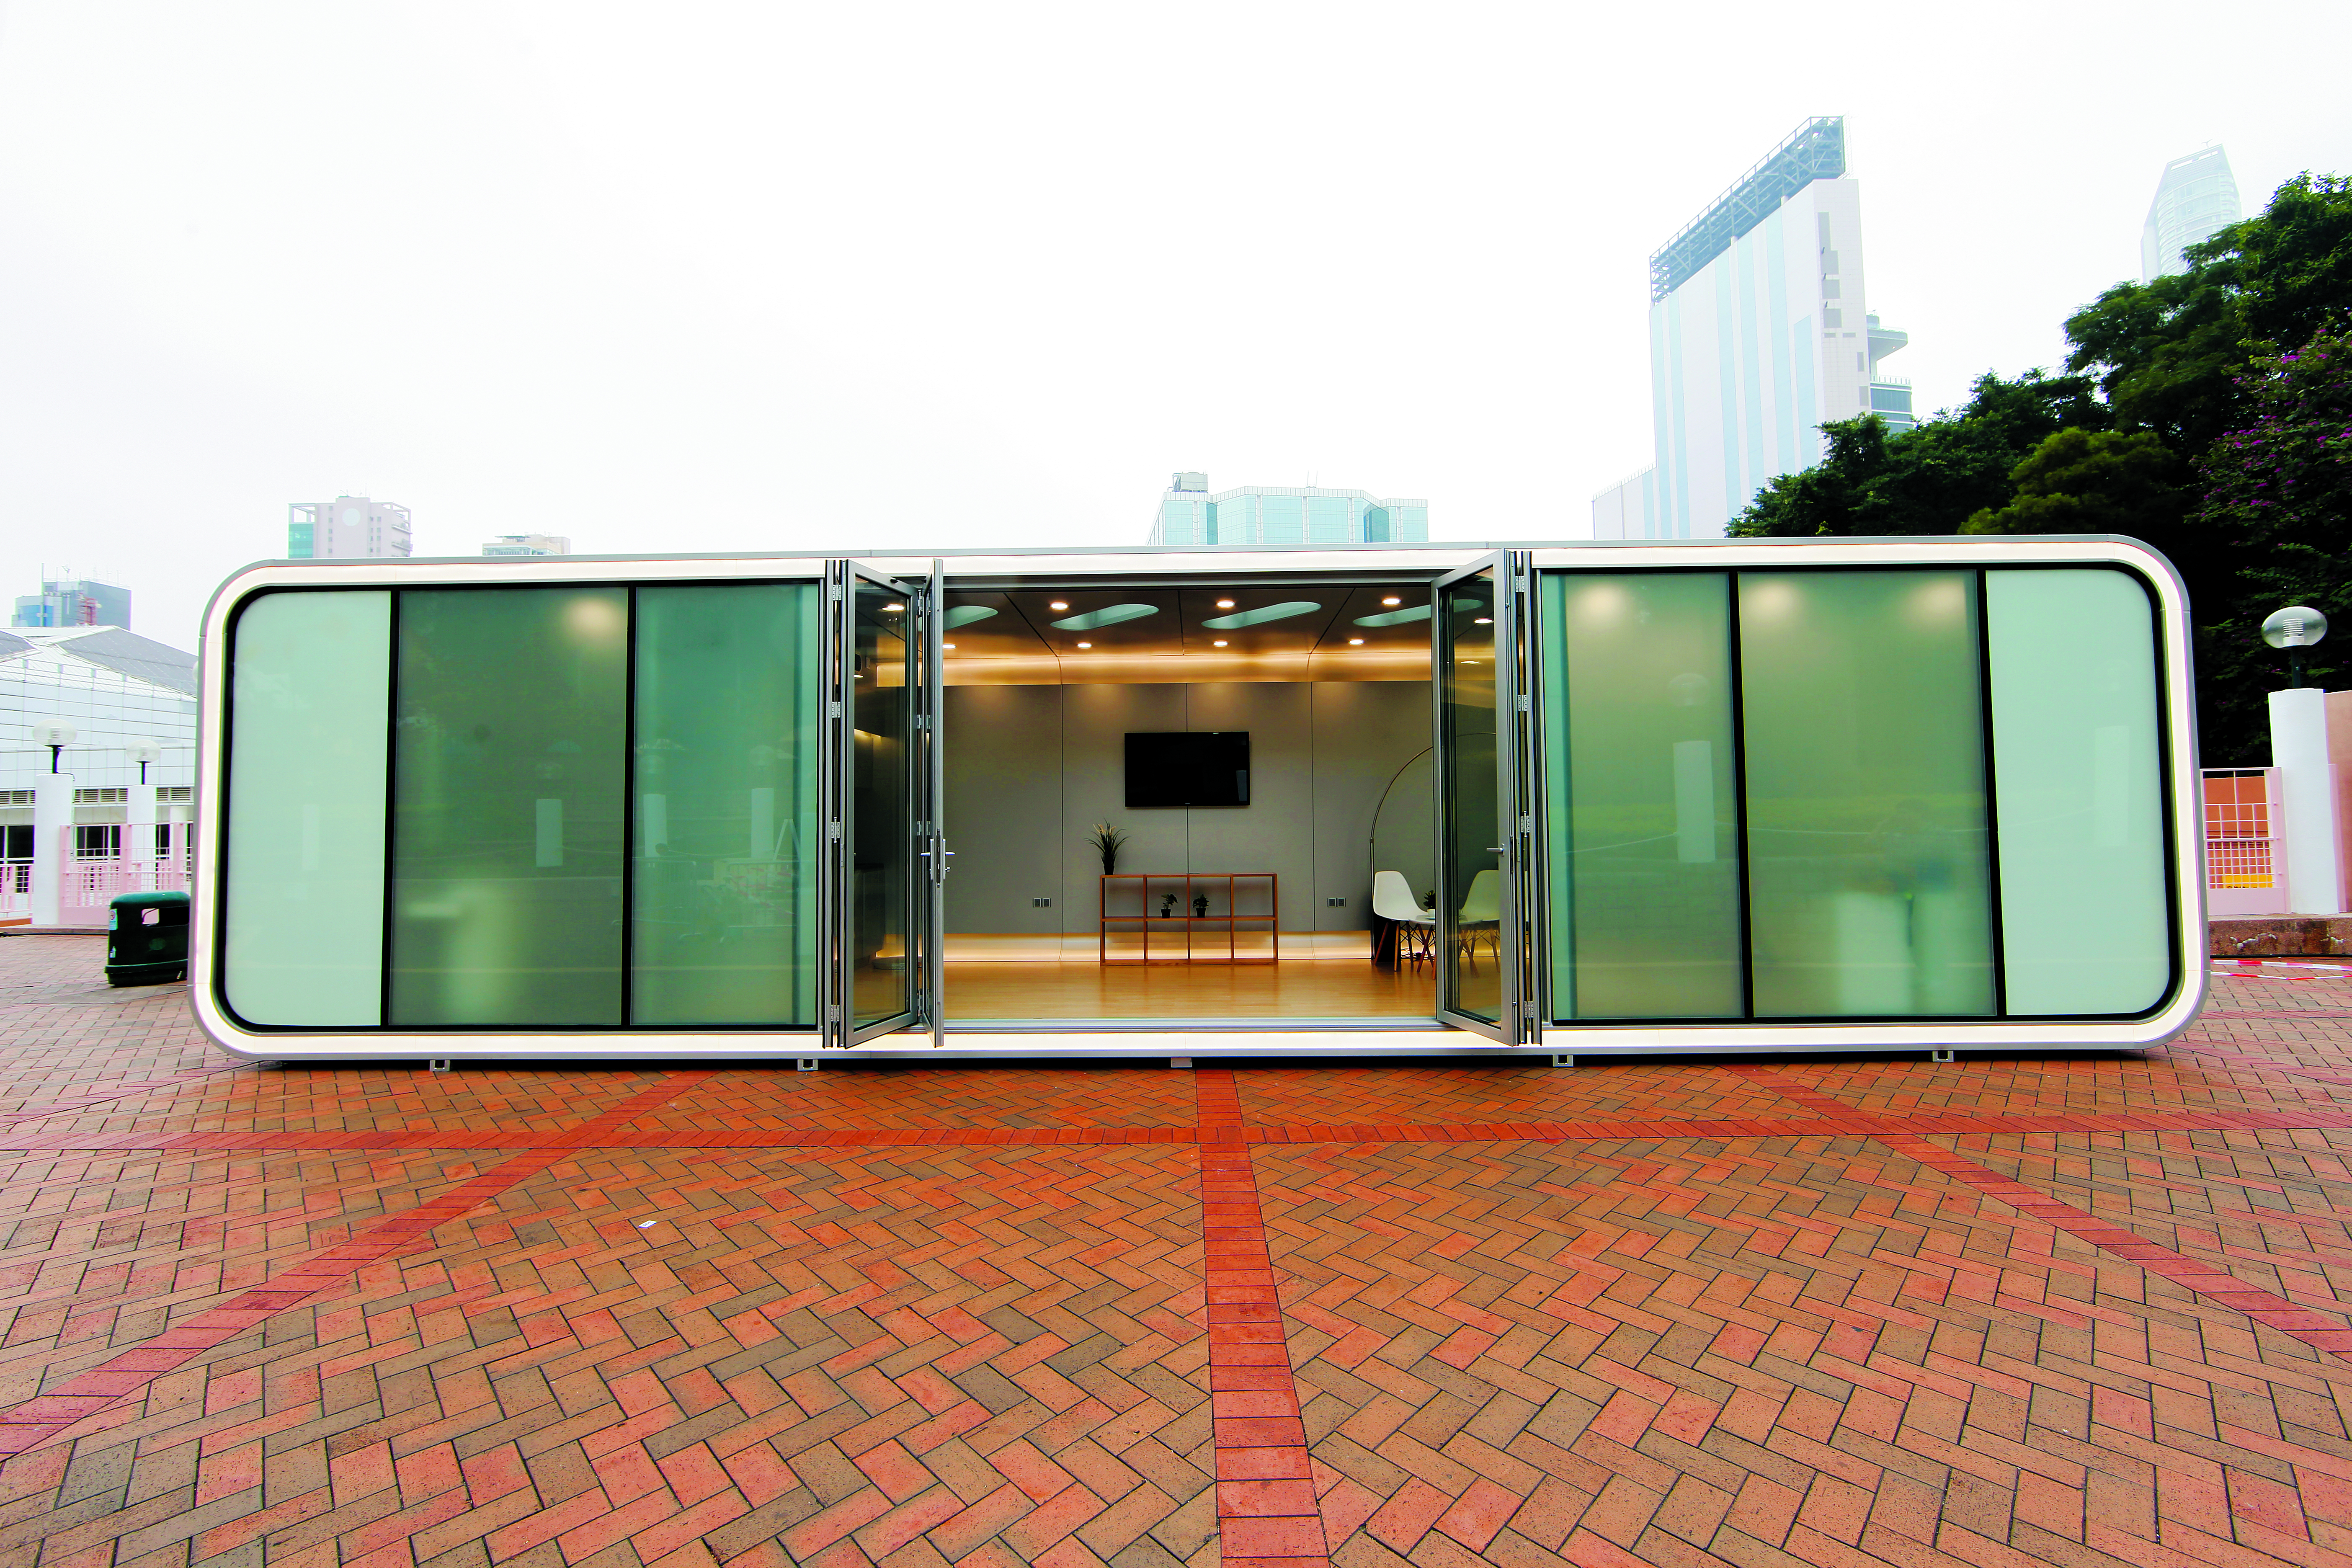 This handout image shows ALPOD is a futuristic aluminium mobile home designed, engineered, and produced by a team of Hong Kong visionaries. It makes its debut during the Hong Kong edition of the 2015 Bi-city Biennale of Urbanism\Architecture (the Biennale). Credit: courtesy of AluHouse [2016 FEATURES LIFE INTERIORS]